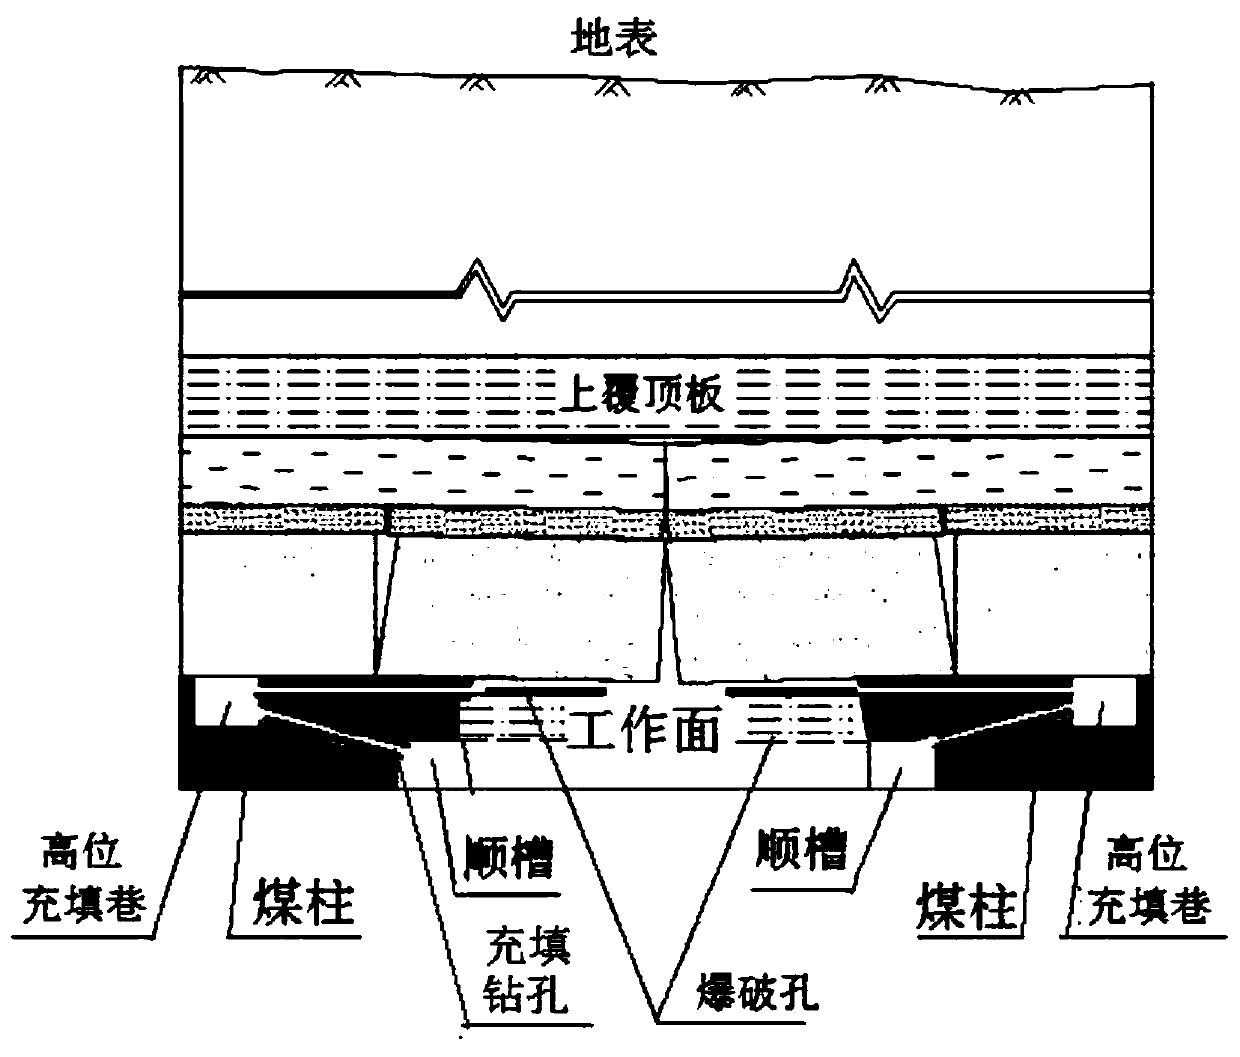 Strip fully-mechanized top coal caving high cut and fill mining method of thick coal seam under coal mine railway